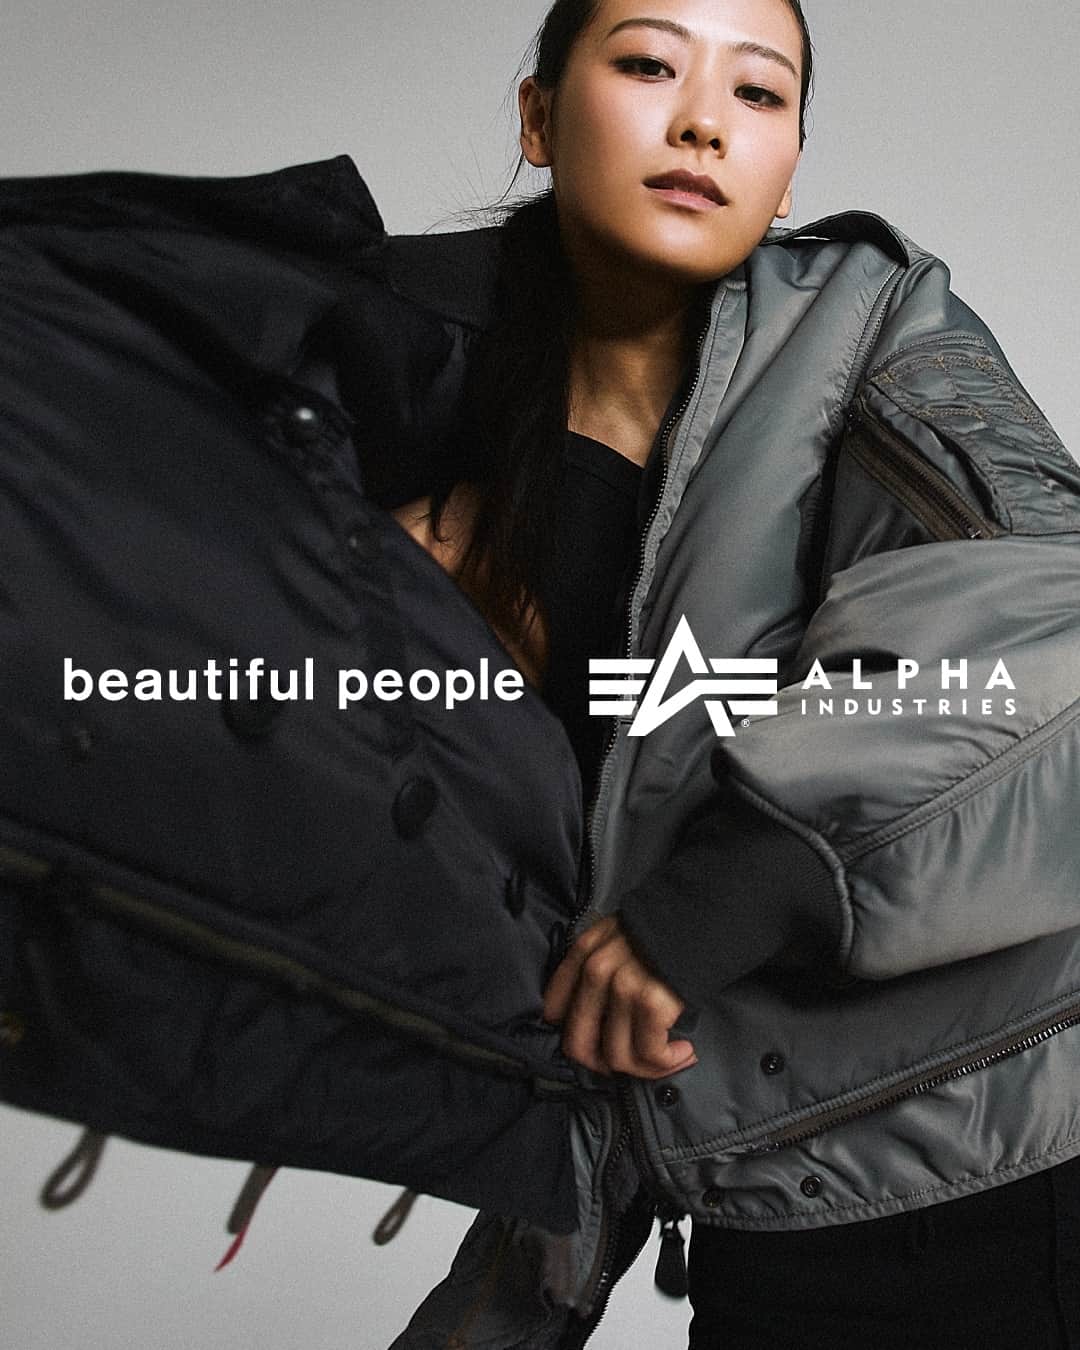 ビューティフルピープルさんのインスタグラム写真 - (ビューティフルピープルInstagram)「#DOUBLEEND beautiful people x ALPHA INDUSTRIES @alphaindustries @alpha_industries_japan⁠ 4-WAY flight jacket⁠ ⁠ ◻︎ ⁠beautiful people x ALPHA INDUSTRIES double-end nylon flight jacket⁠ color: ⁠gray*navy⁠ size: ⁠34/36/38/40/42⁠ material: ⁠nylon 100%⁠ ALPHA INDUSTRIESとのコラボレーションブルゾン。上下逆さまに着用することで、N-2BがMA-1へと変化します。さらにリバーシブルで着用することで、オリジナルのネイビーカラーに。⁠ 確かな実績を誇るALPHA縫製工場にて作成された本格仕様です。ダブルエンドならではのボリューム感とデザインのありそうでない1着に。⁠ ⁠ ⁠ ALPHA INDUSTRIES and beautiful people have collaborated for the first time to launch a new 4-way bomber jacket with authentic military specifications.⁠ ⁠ Inspired by a test sample of a 1958 N-2B flight jacket, which was never released to the public, and ALPHA's signature MA-1 vintage flight army, this bomber jacket is a surprising 4-way specification that can be worn inside-out and upside-down.⁠ ⁠ ___⁠ ⁠ ⁠ ■Online store⁠ www.beautiful-people.jp⁠ ⁠ ■Global Online store⁠ www.beautiful-people-creations-tokyo.com⁠ ⁠ ■ 青山店⁠⁠⁠⁠ 東京都港区南青山3-16-6⁠⁠⁠⁠ ⁠⁠⁠⁠ ■ 新宿伊勢丹店⁠ 伊勢丹新宿店本館2階⁠ TOKYOクローゼット/リ・スタイルTOKYO⁠⁠⁠⁠ ⁠⁠⁠⁠ ■ 渋谷PARCO店⁠ 渋谷パルコ2階⁠ ⁠ ■ ジェイアール名古屋タカシマヤ店⁠ ジェイアール名古屋タカシマヤ4階⁠ モード＆トレンド「スタイル＆エディット」⁠⁠⁠⁠ ⁠⁠⁠⁠ ■⁠阪急うめだ店⁠ 阪急うめだ本店3階　モード⁠⁠⁠⁠ ___⁠ ⁠ #beautifulpeople⁠⁠⁠ #ビューティフルピープル⁠⁠⁠ #SideC ⁠ #DOUBLEEND⁠ #ダブルエンド⁠ #collaboration⁠ #コラボ⁠ #MA1⁠ #N2B⁠ #reversible⁠ #4way⁠ #flightjacket⁠ #blouson⁠ #ALPHAINDUSTRIES⁠ #ALPHA」10月13日 10時00分 - beautifulpeople_officialsite